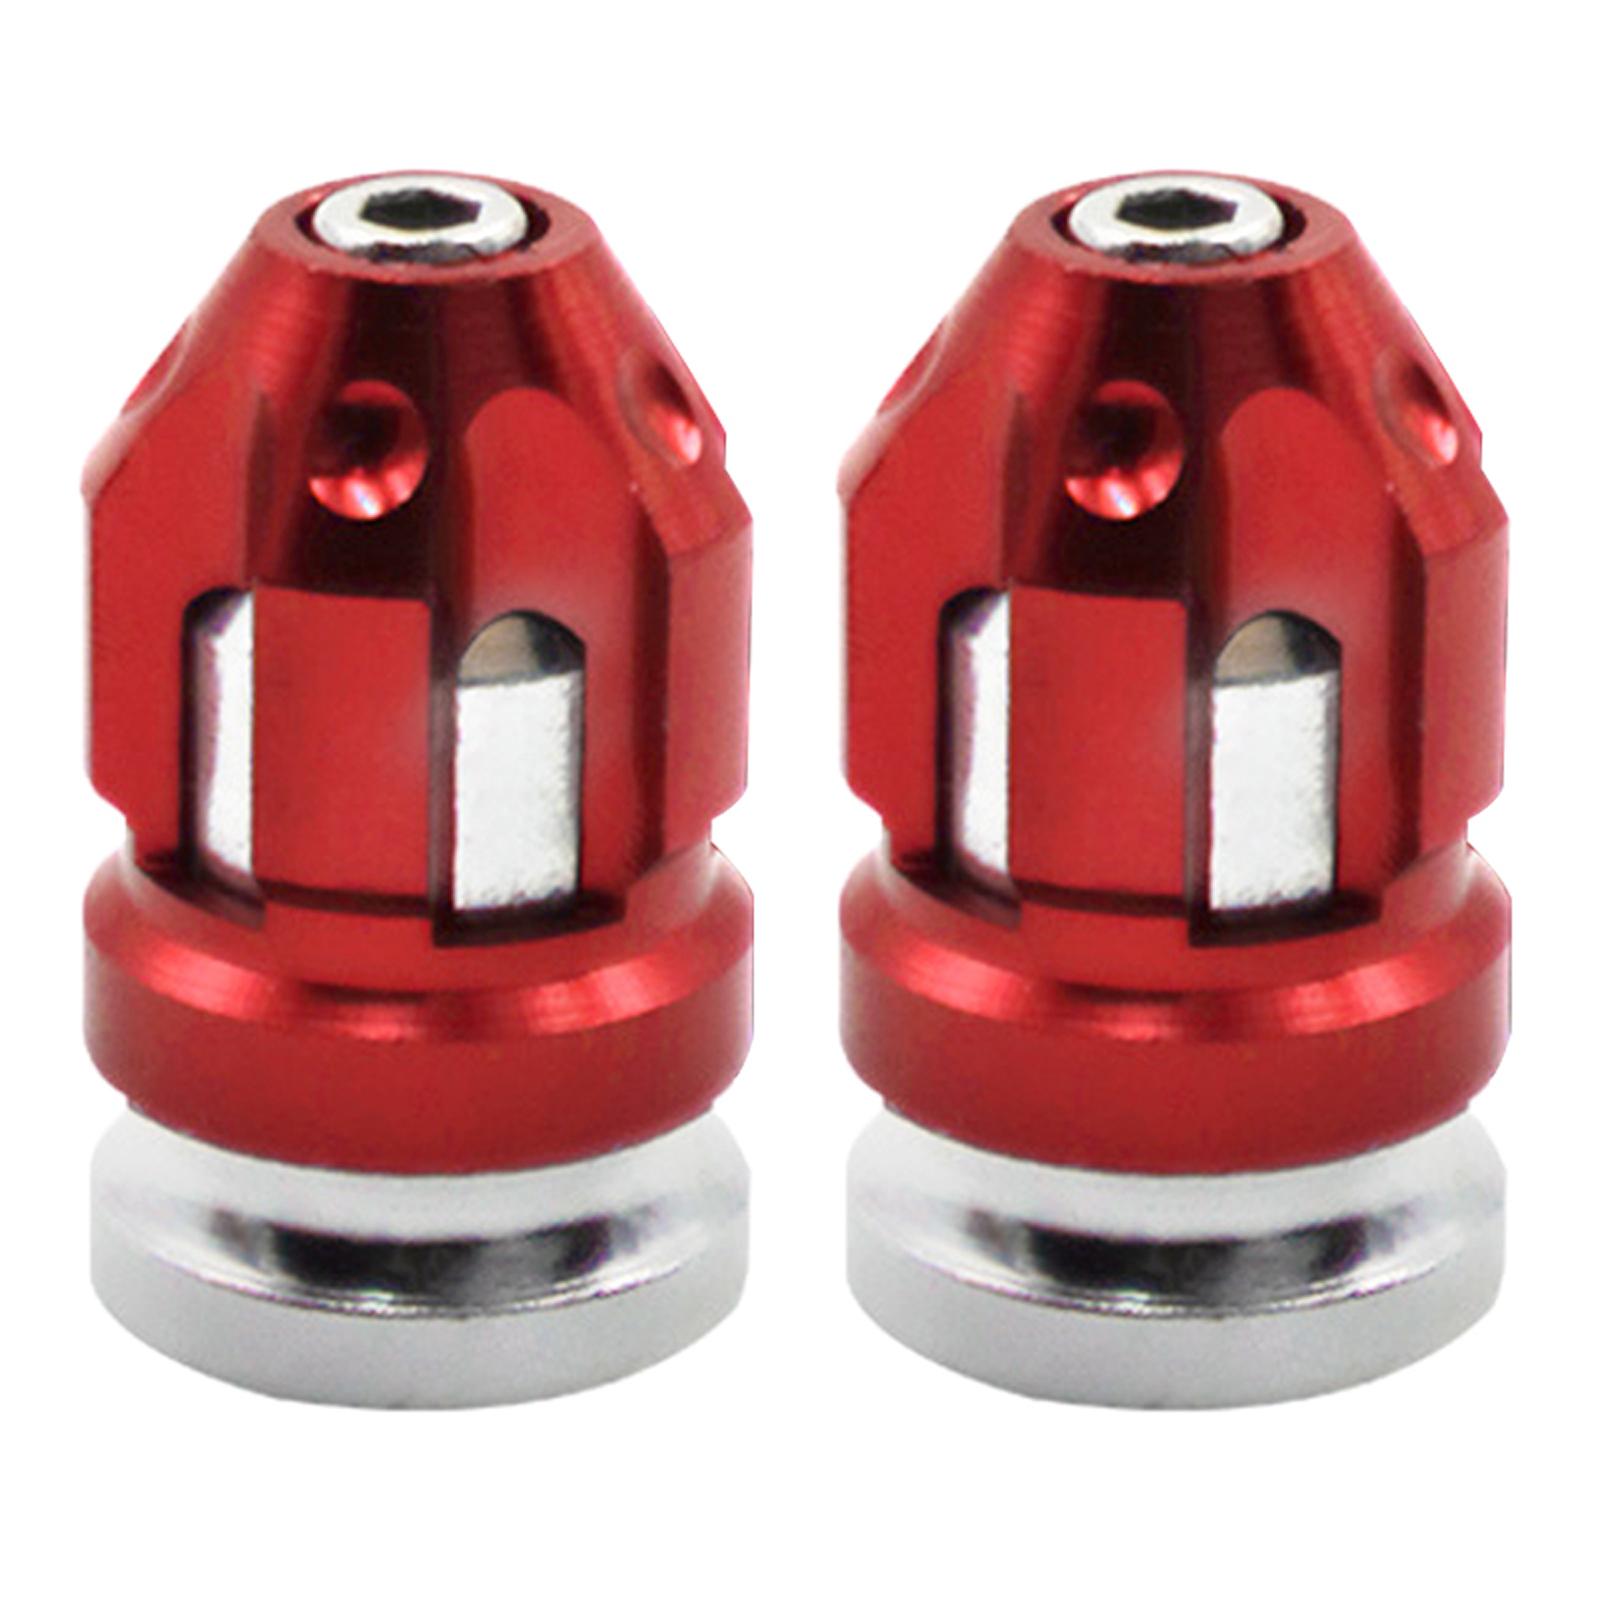 2Pcs Tire Valve Stem Caps Protection Fit for Motorcycles Suvs Mountain Bike Red 